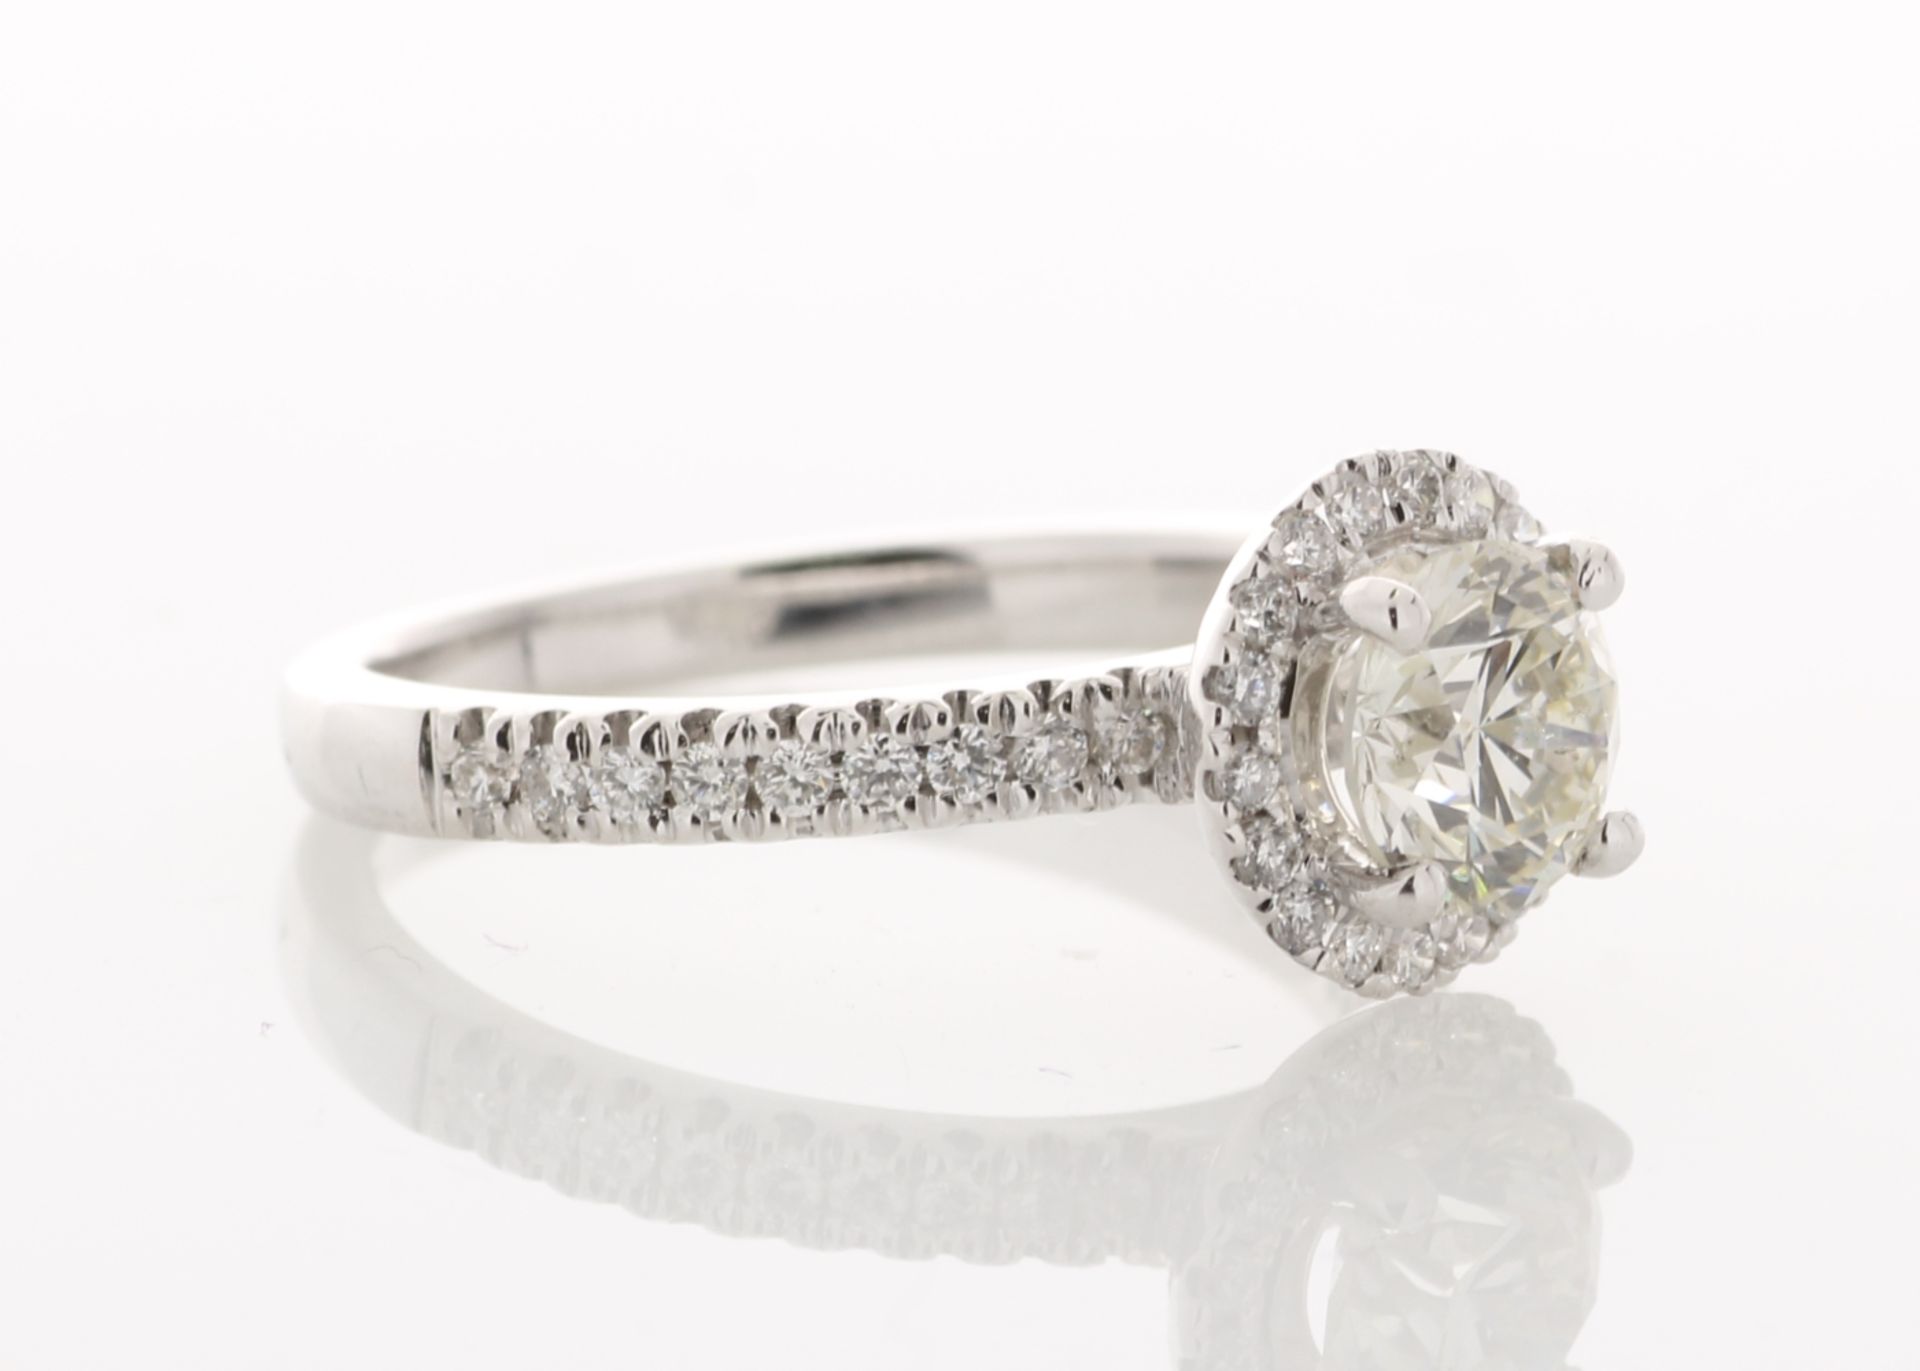 18ct White Gold Single Stone With Halo Setting Ring (1.01) 1.37 Carats - Valued by IDI £20,000. - Image 4 of 5